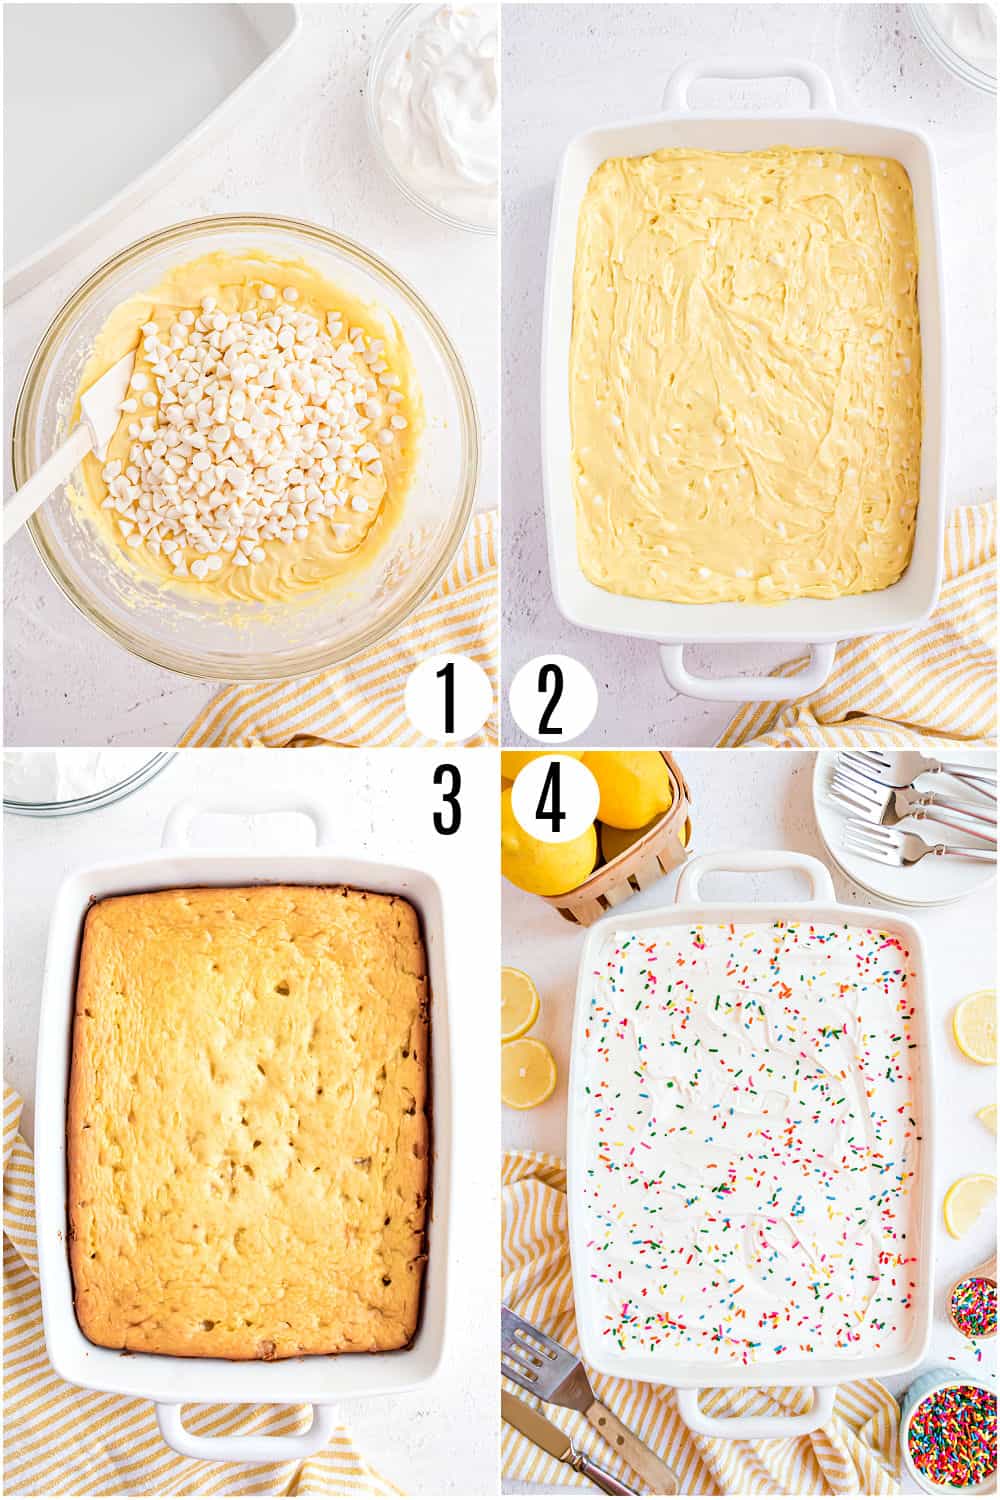 Step by step photos showing how to make lemon pudding cake.